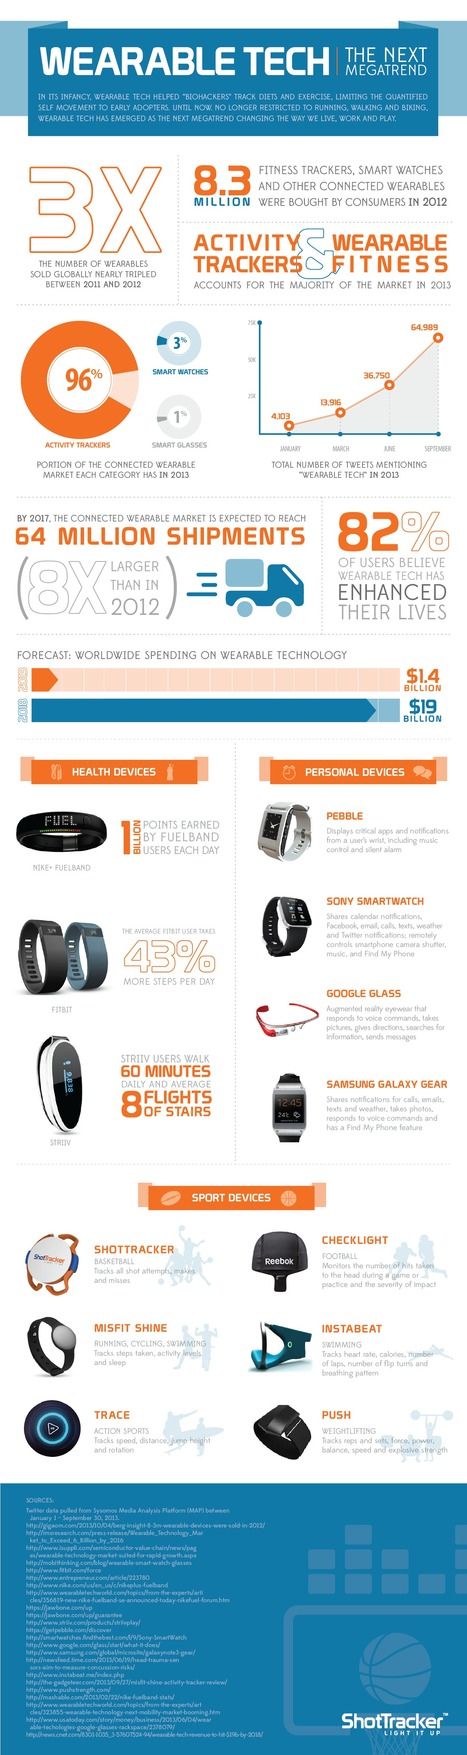 Wearable Tech Infographic